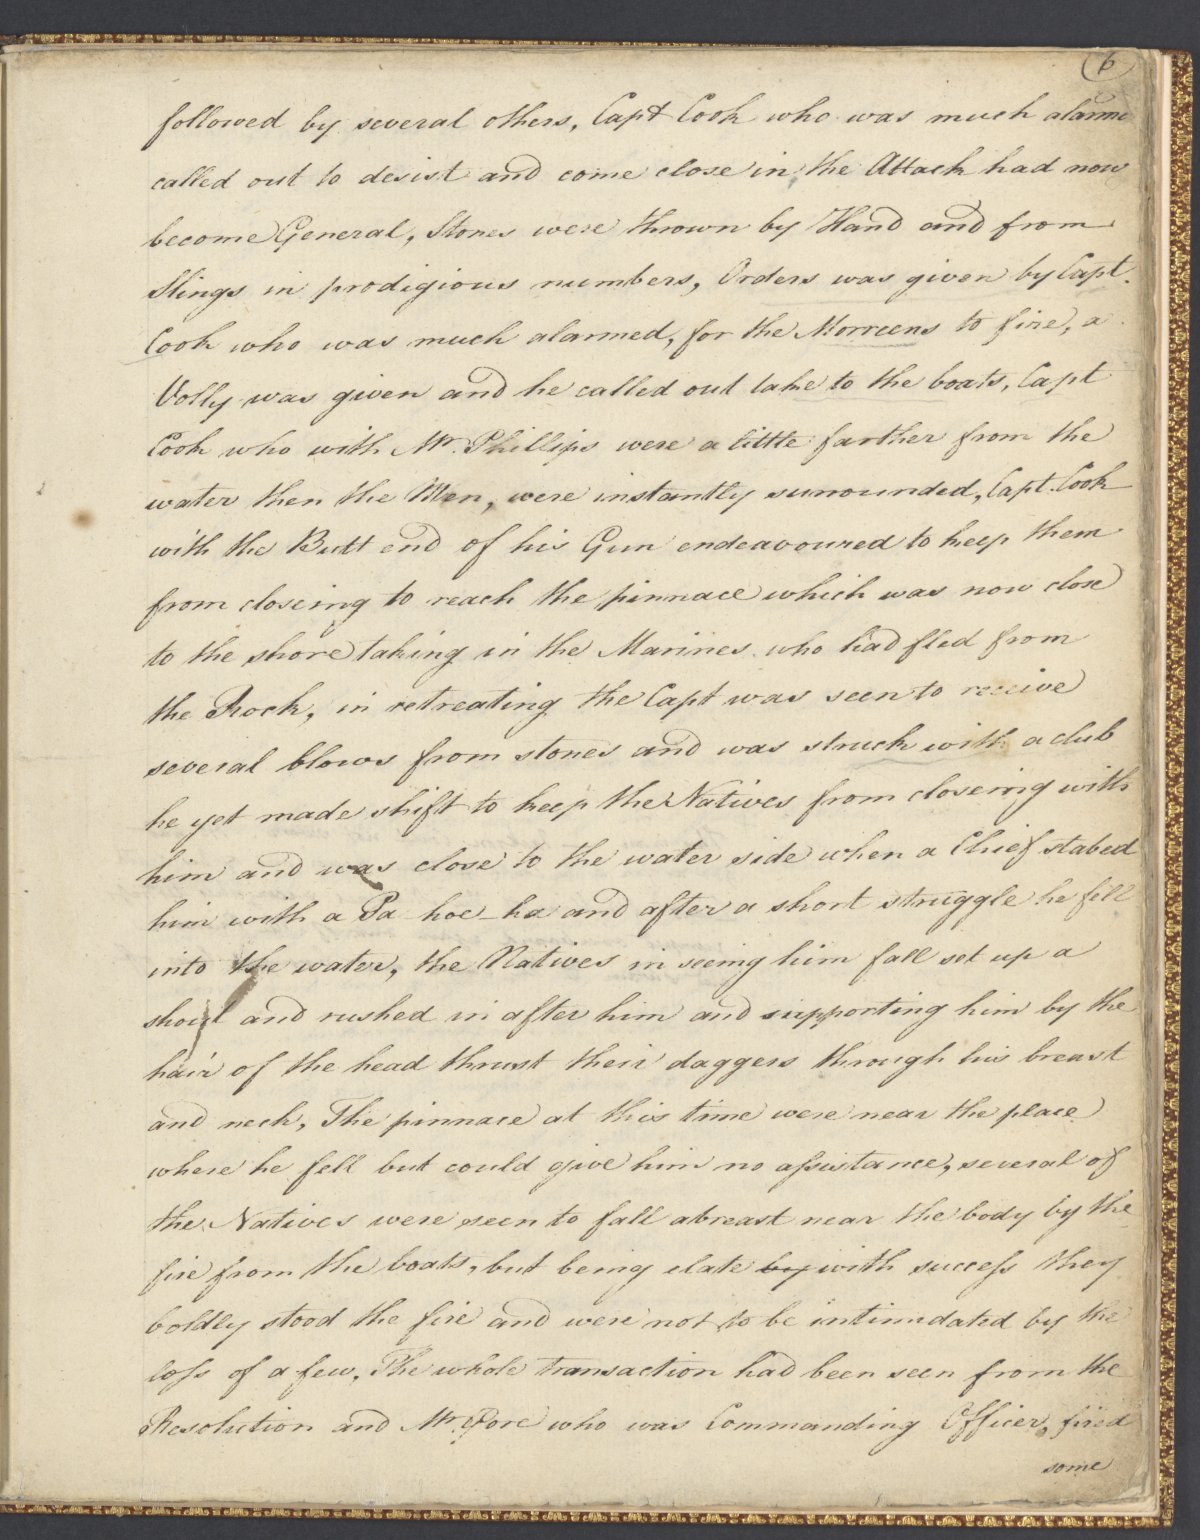 A page of a manuscript with cursive handwriting